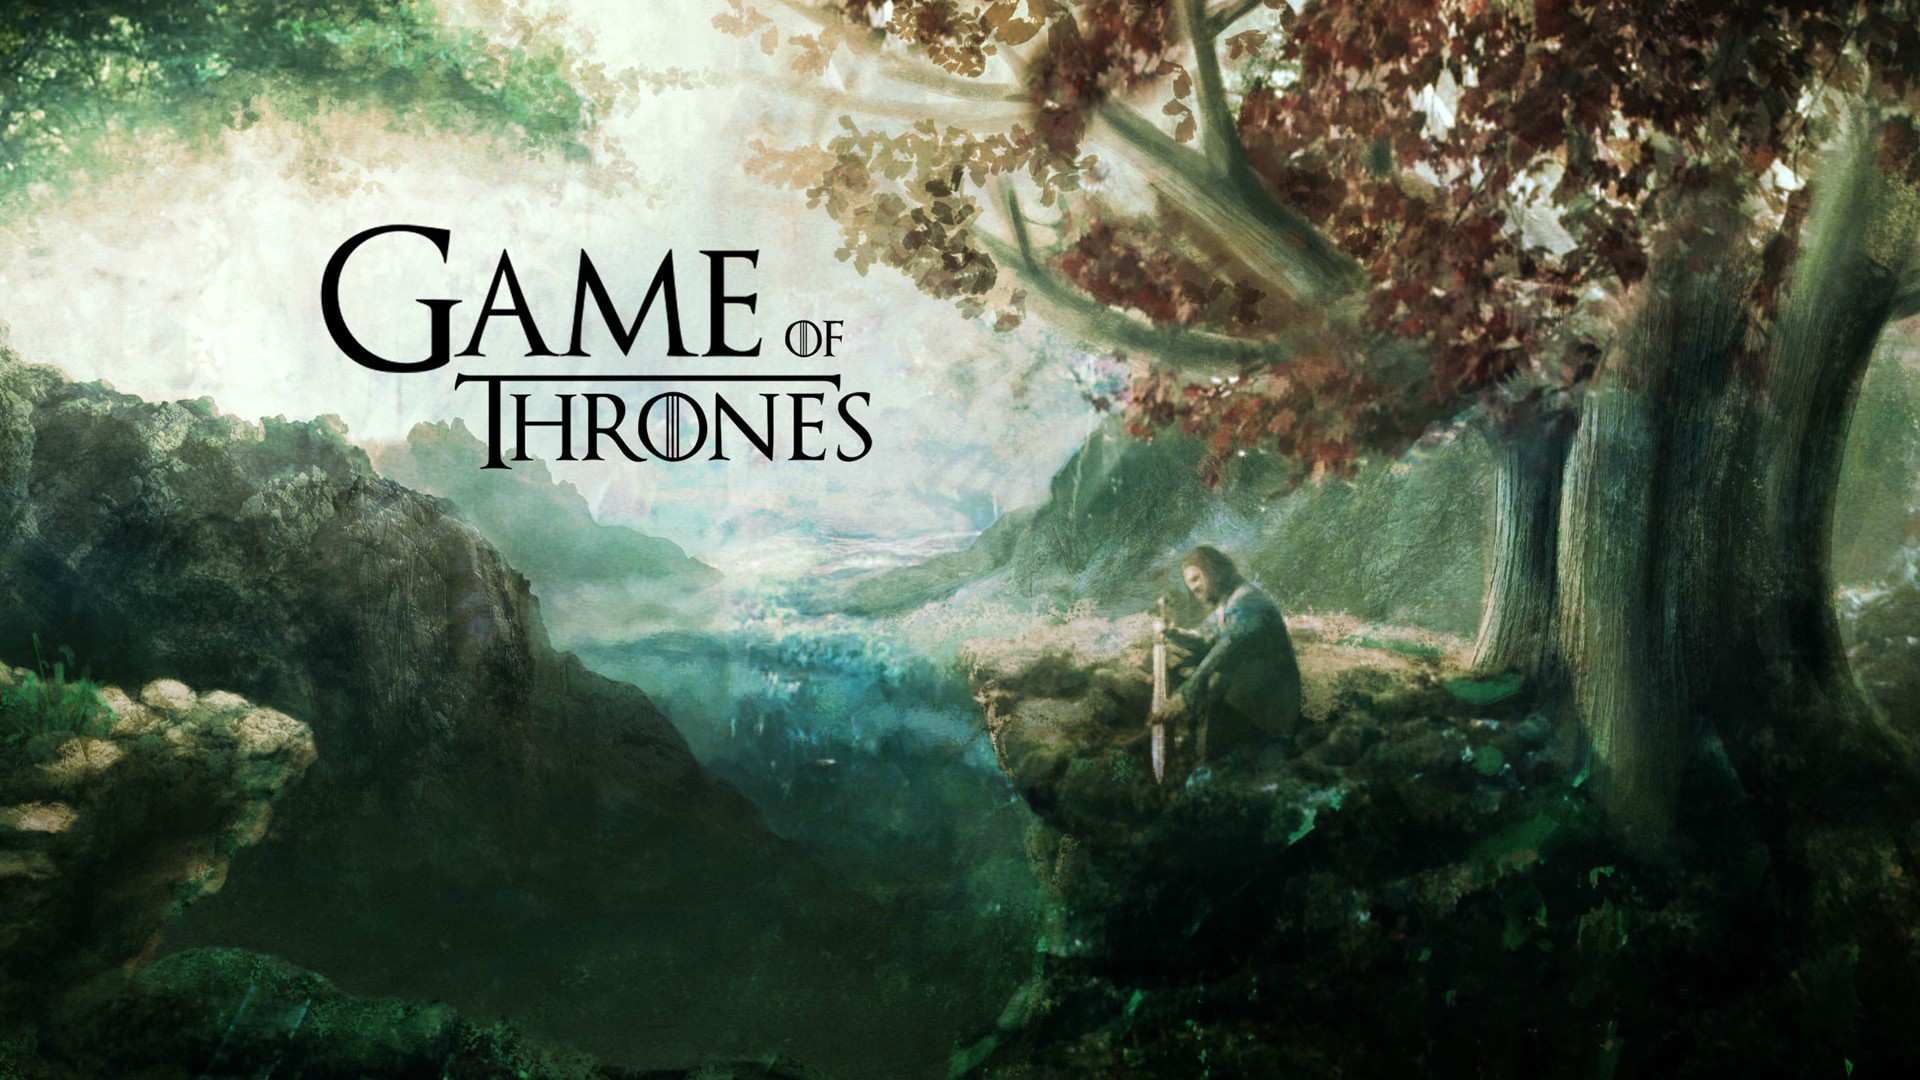 General 1920x1080 Game of Thrones Ned Stark Winterfell TV series